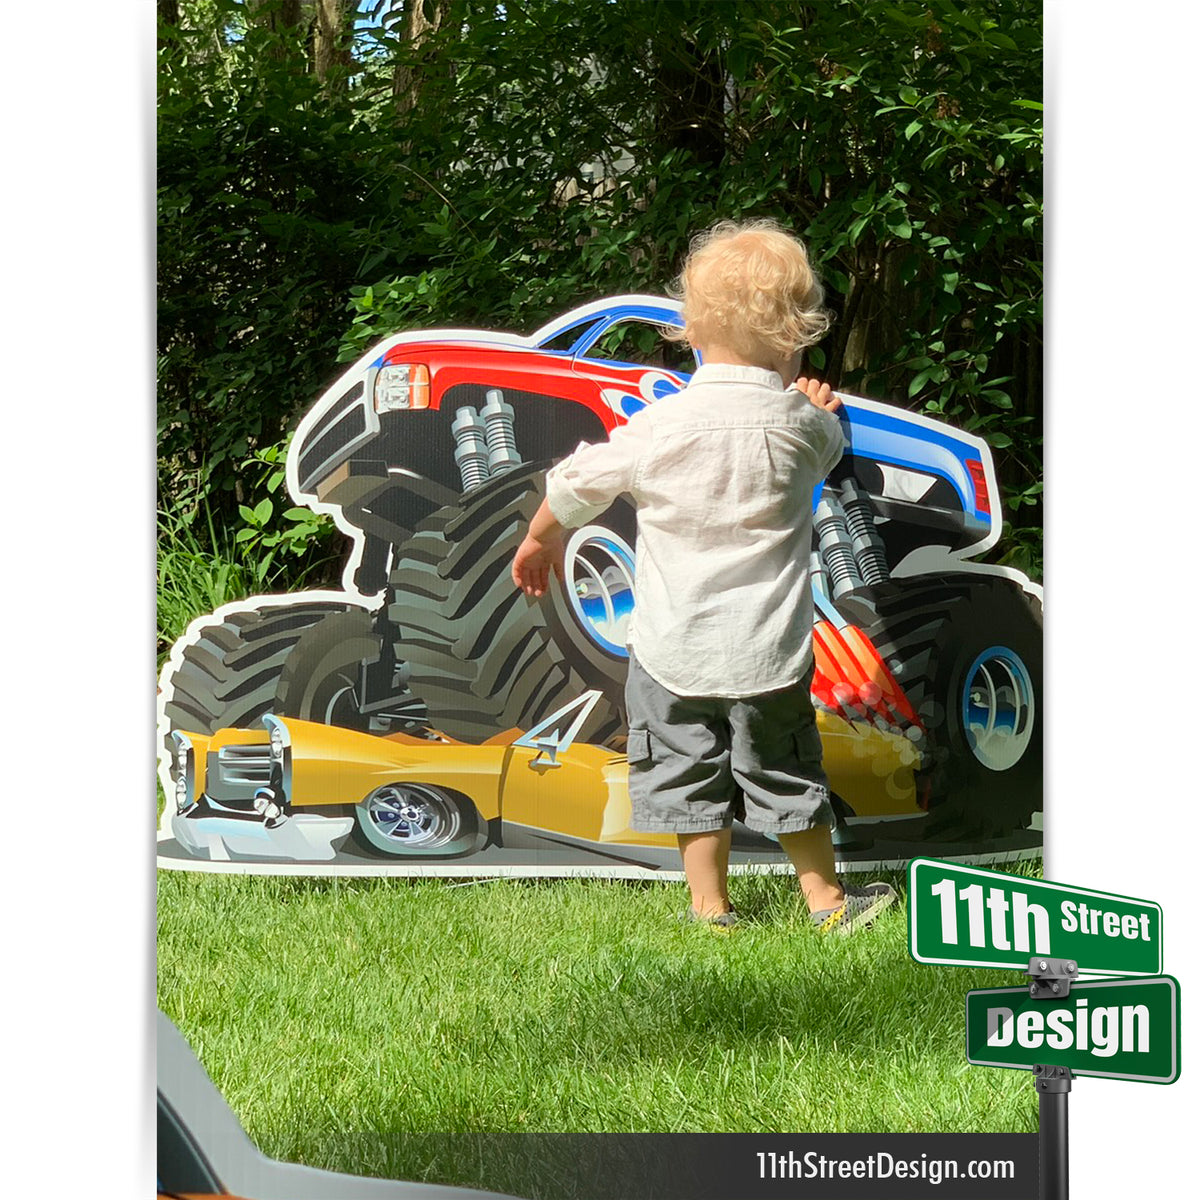 Personalized Monster Truck Theme Birthday Party Decorations, Yard Card Lawn Signs 0004